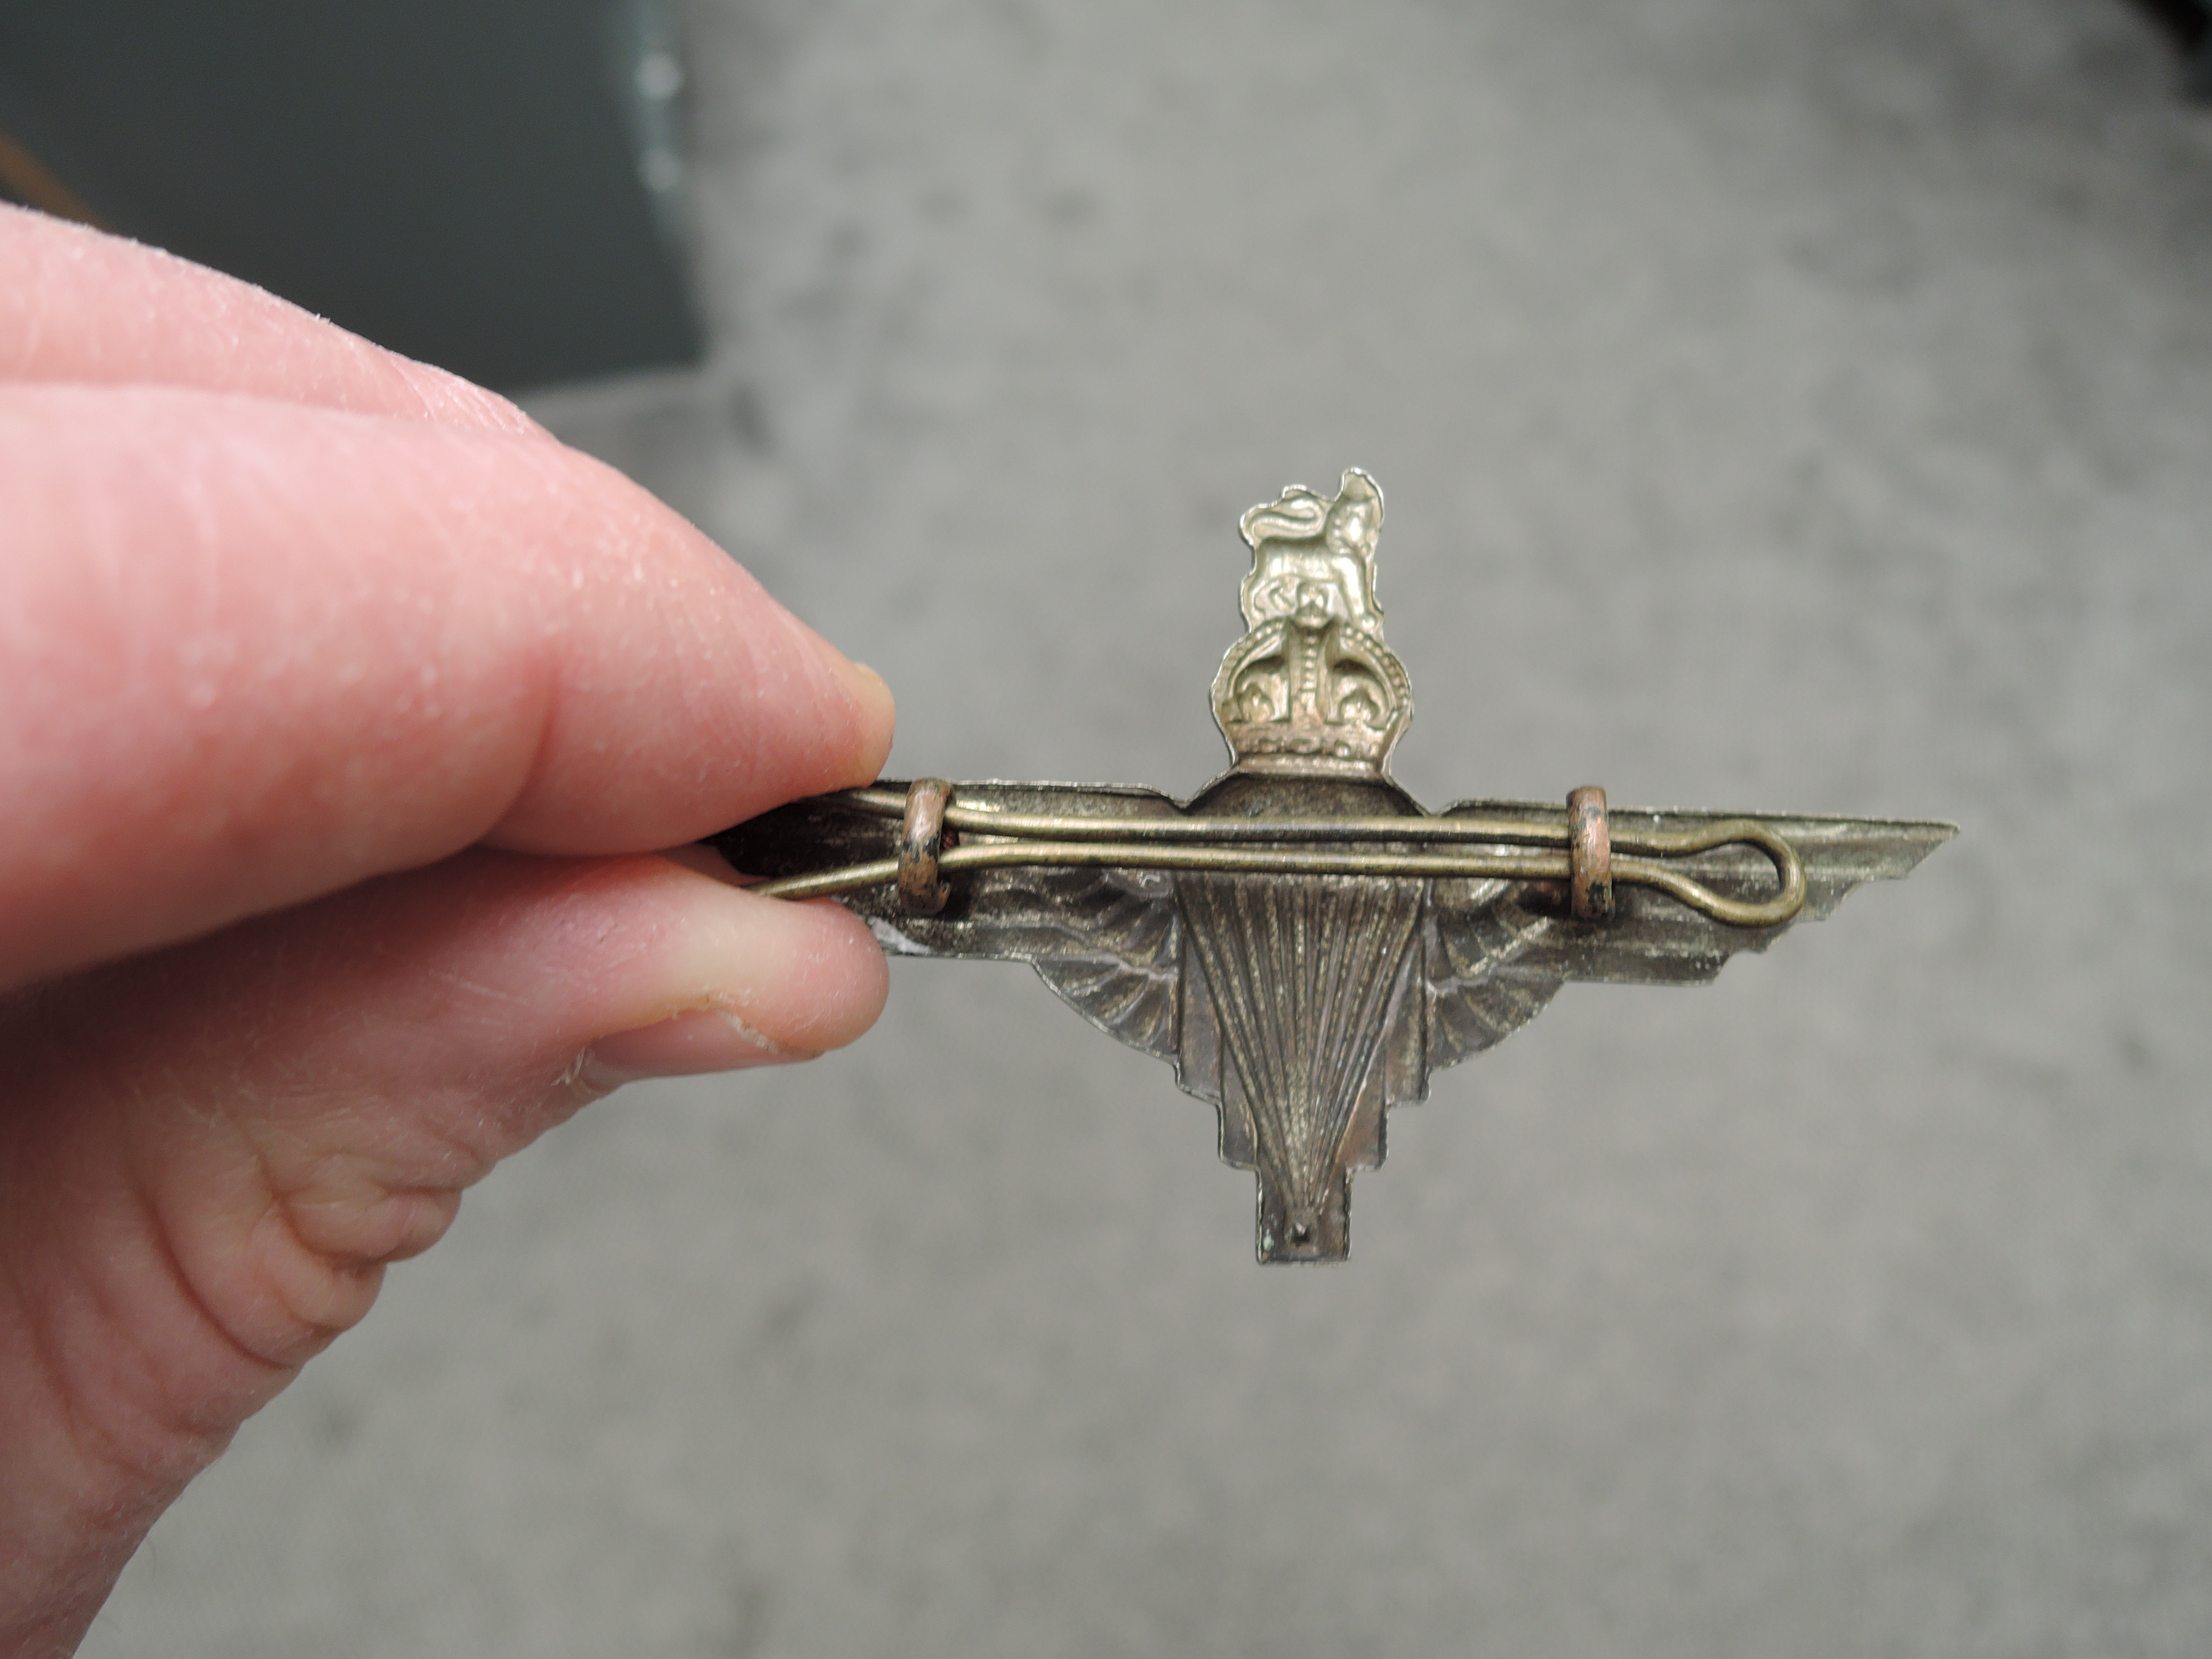 A collection of Army/Military Cap Badges along with a small collection of Coins - Image 7 of 7